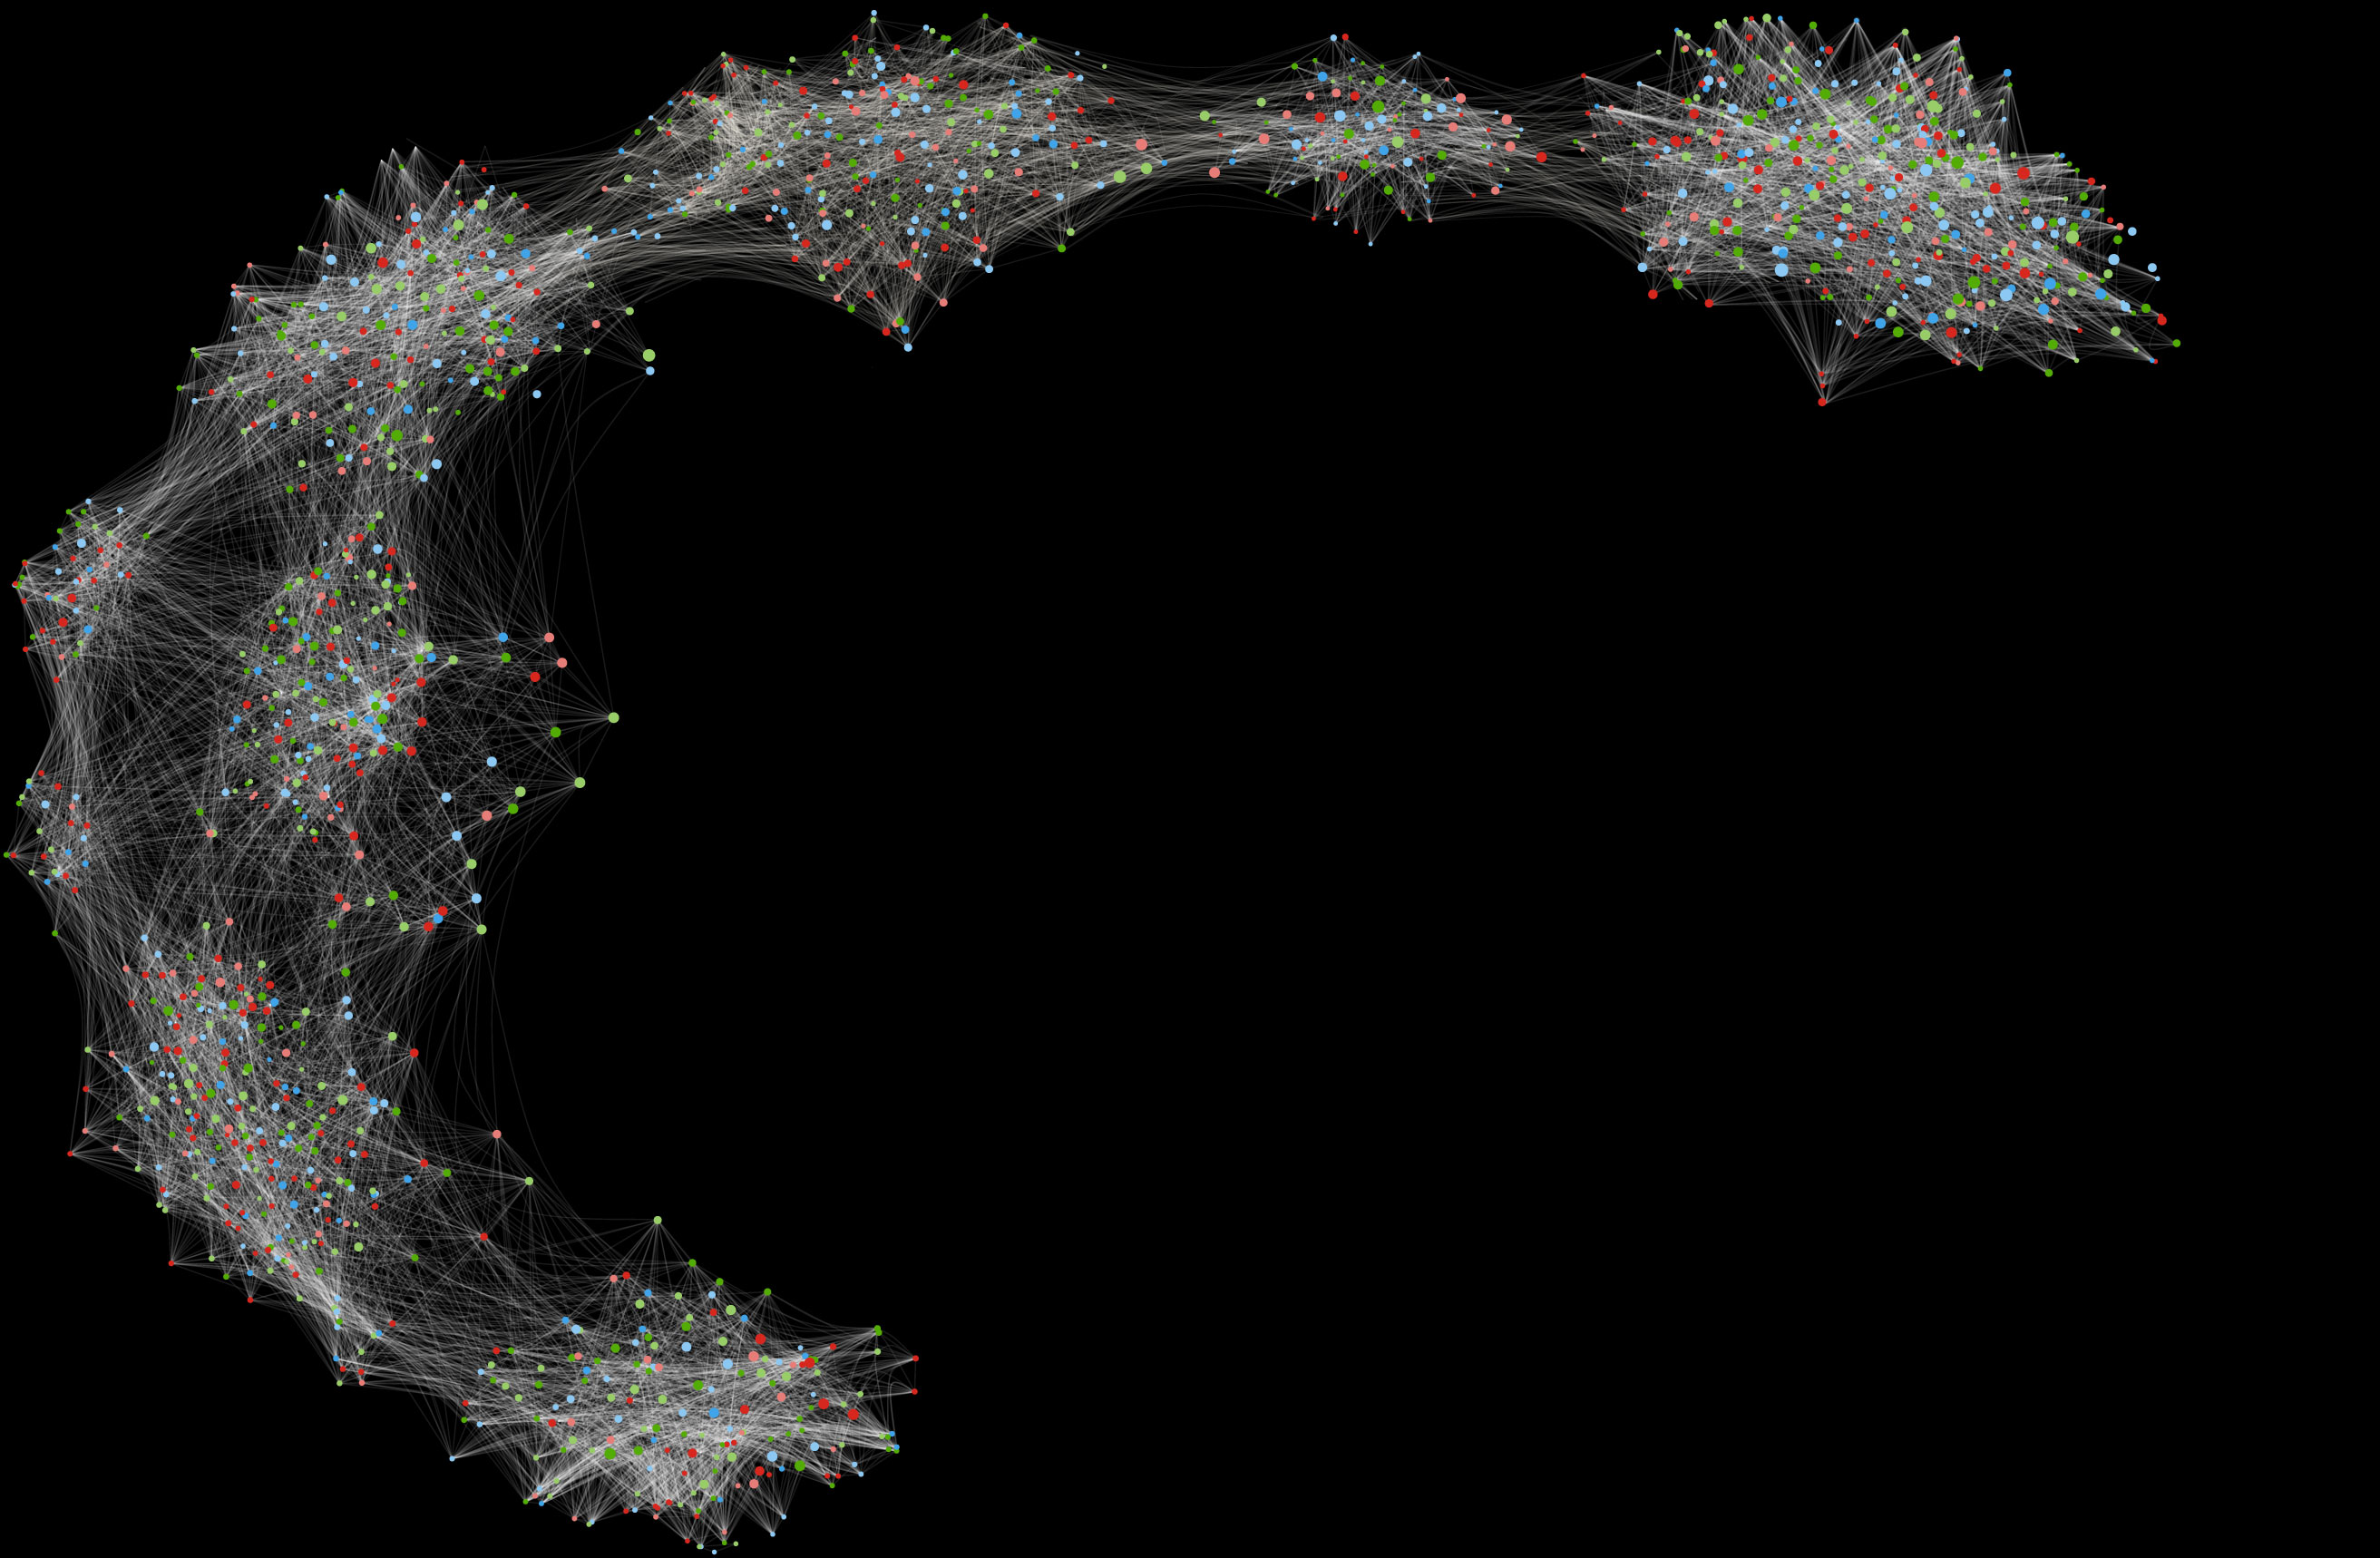 A galaxy-like image of multi-colored metaphorical data connections.